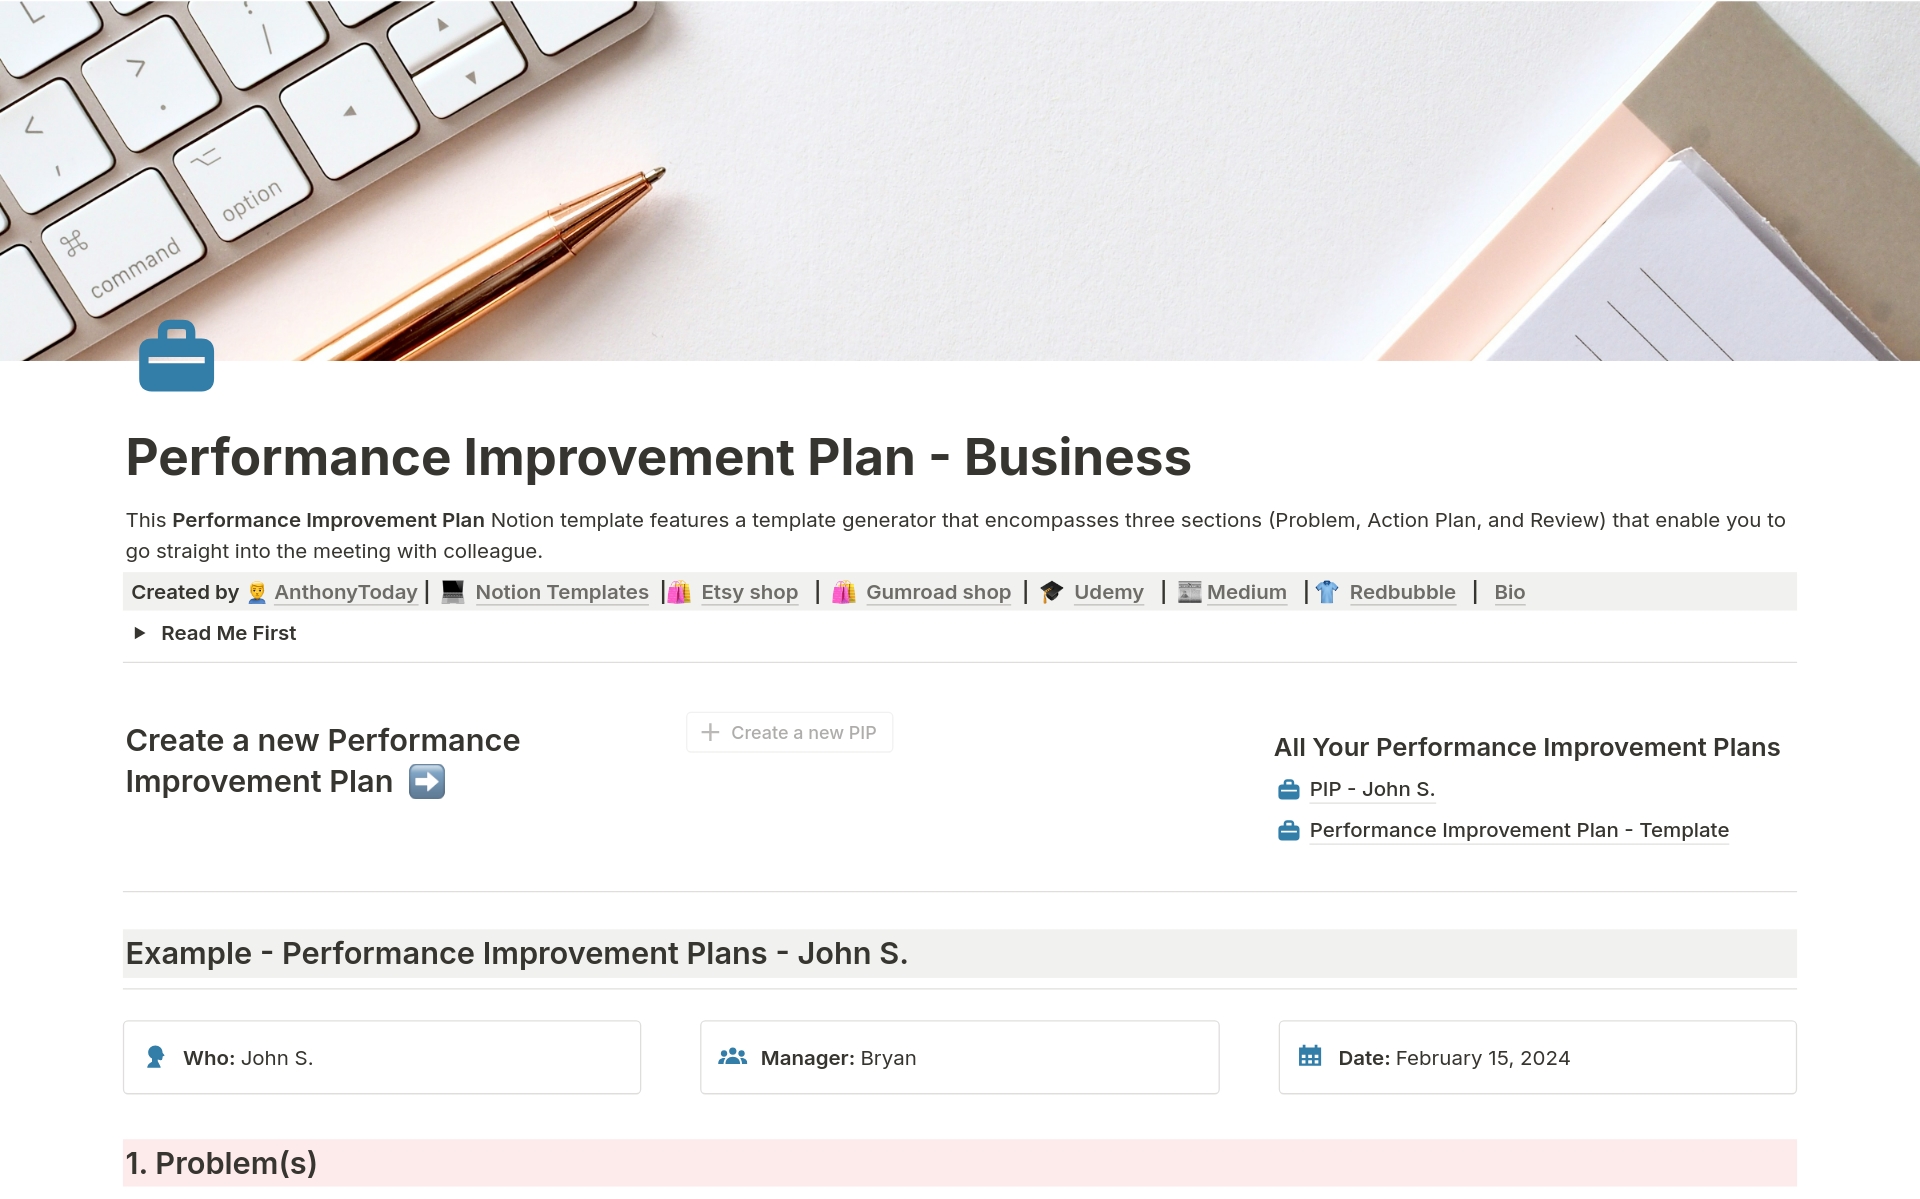 This Performance Improvement Plan - Business Notion template features a template generator that encompasses three sections (Problem, Action Plan, and Review) that enable you to go straight into the meeting with your colleague.